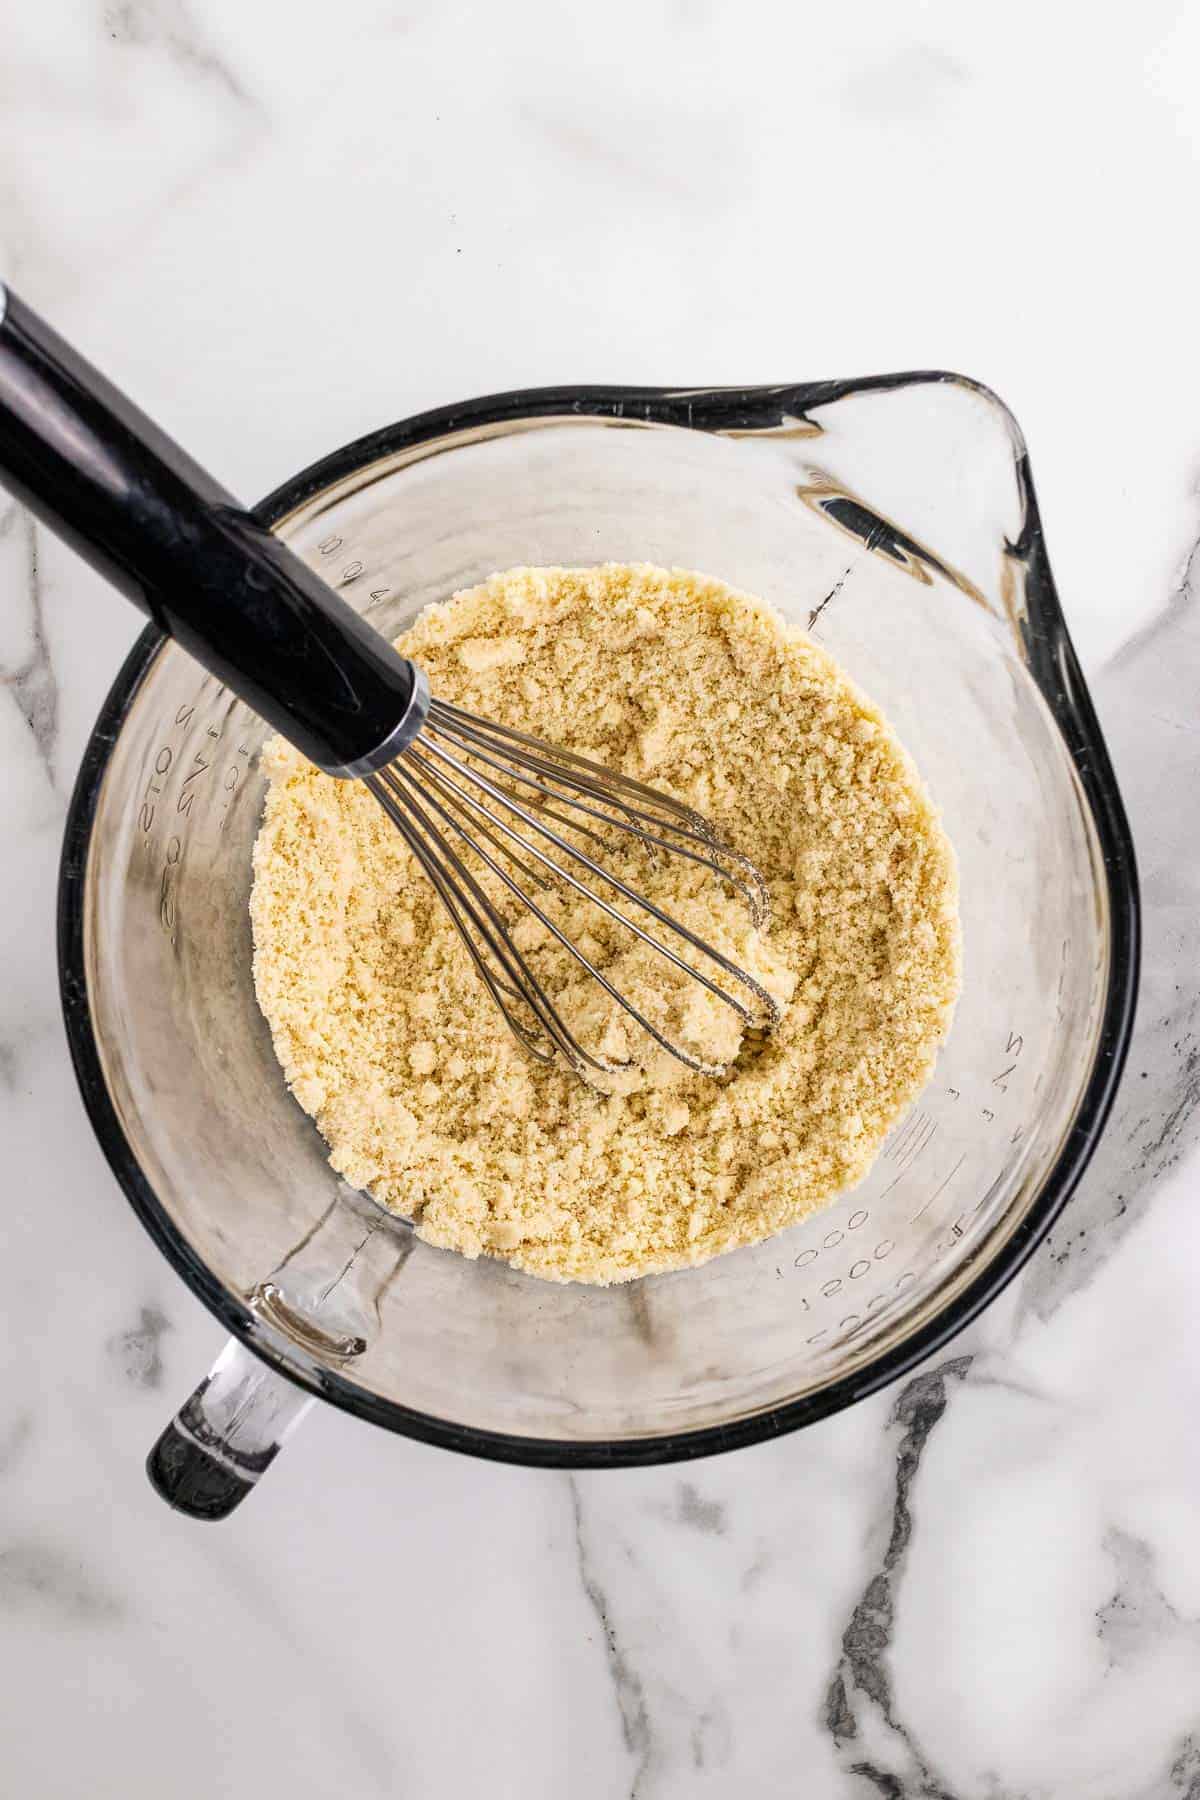 Dry ingredients mixed together in a glass measuring cup with a whisk, as seen from above